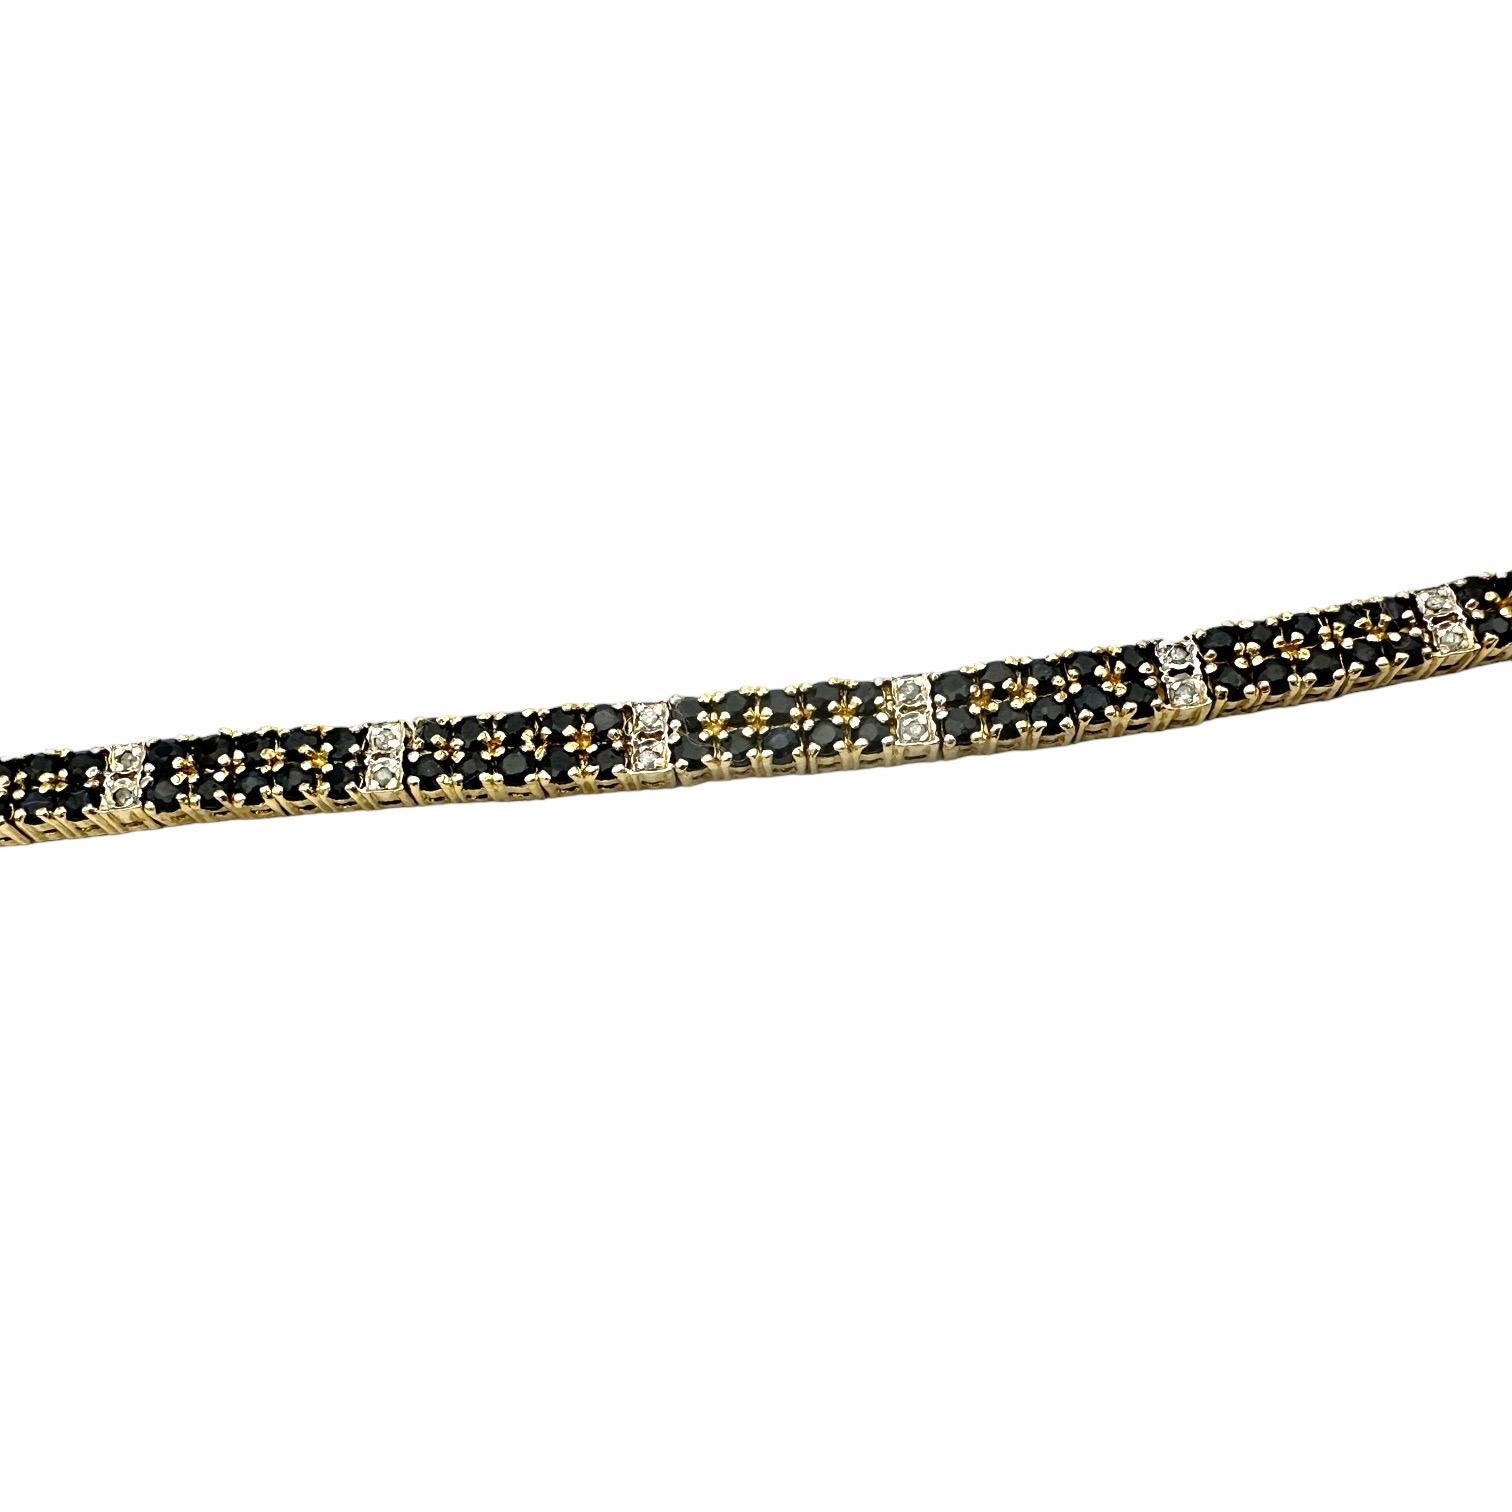 This gorgeous Black Sapphire Diamond Pave Bracelet is crafted with sterling gold electroplate and features a double row of black sapphire stones for added sparkle and shine. Its unique design is perfect for special occasions while also adding an